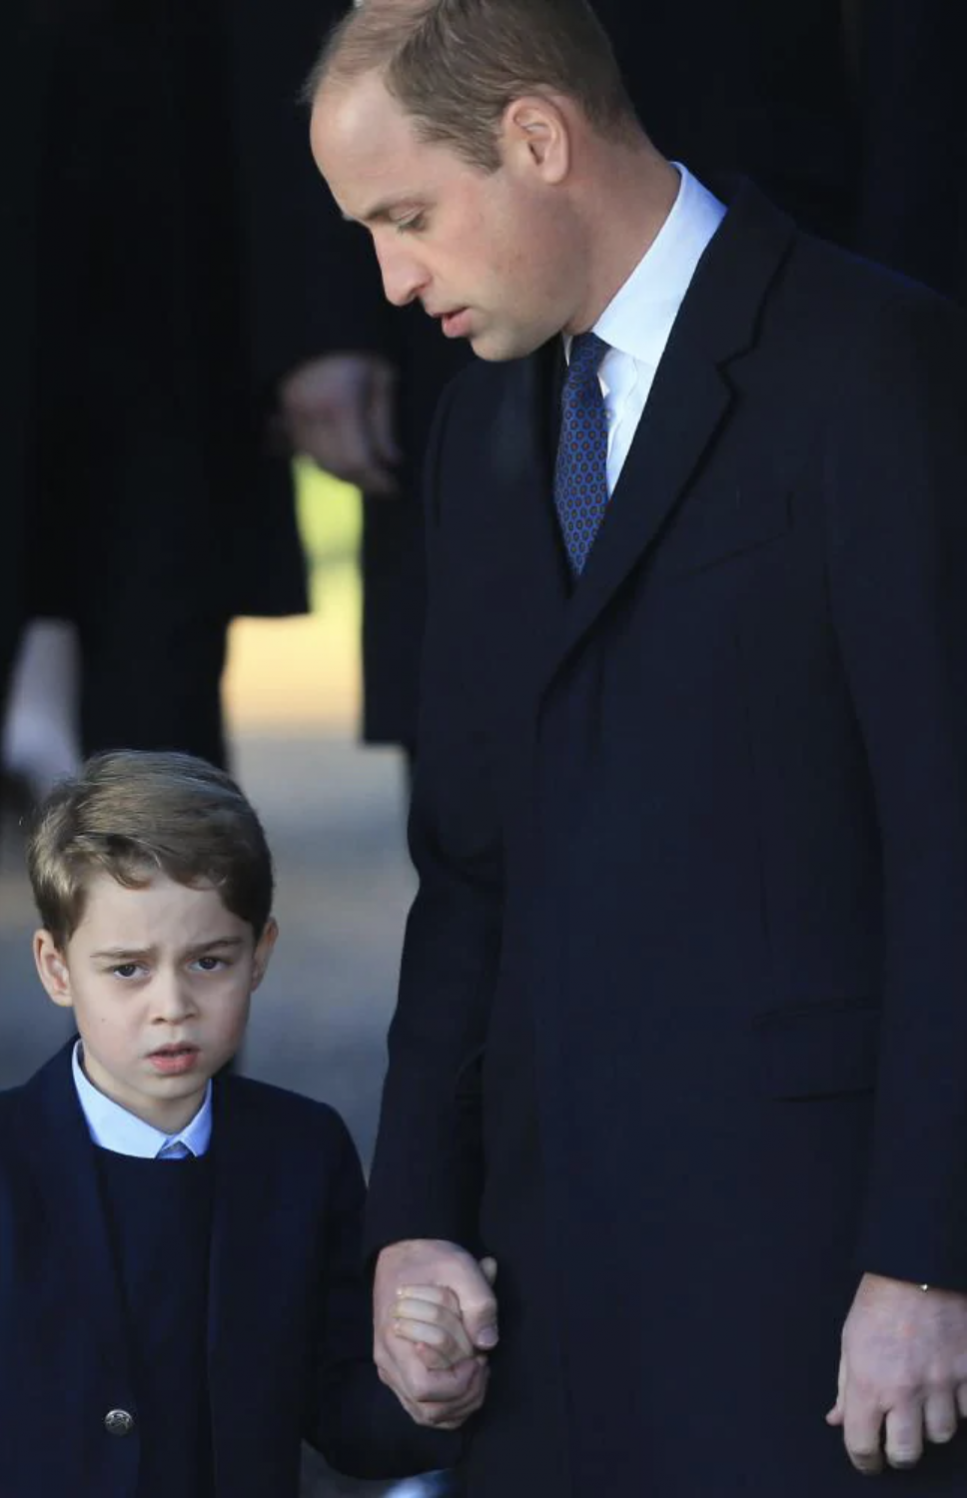  Prince George is third in line to the throne. Picture: Getty Images.Source:Getty Images